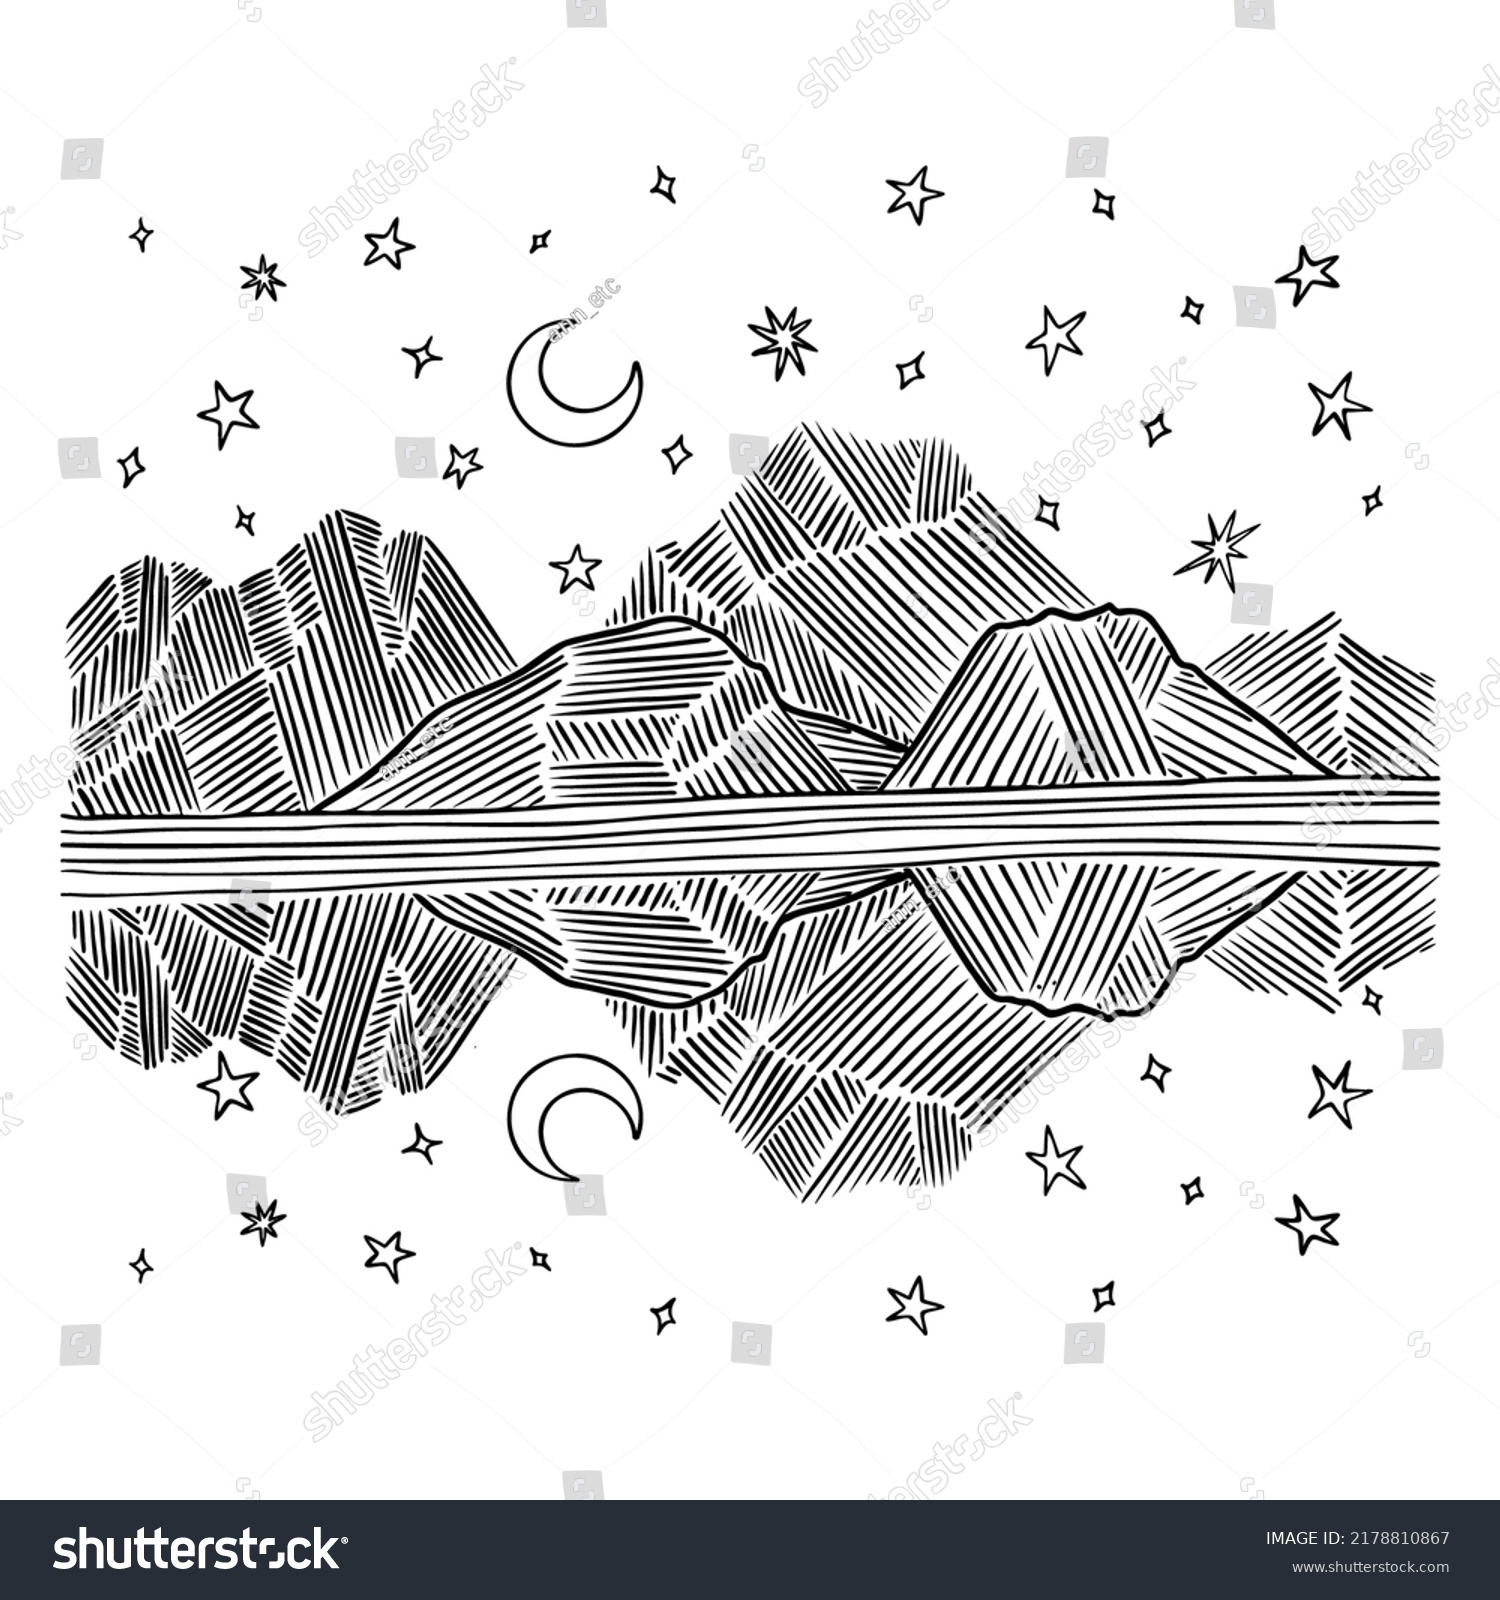 SVG of Abstract graphic mountains, stars, moon with lake reflection. Hand drawnlake Tahoe in California. Vector illustration. Perfect for badges, emblems, patches, t-shirts, etc. svg